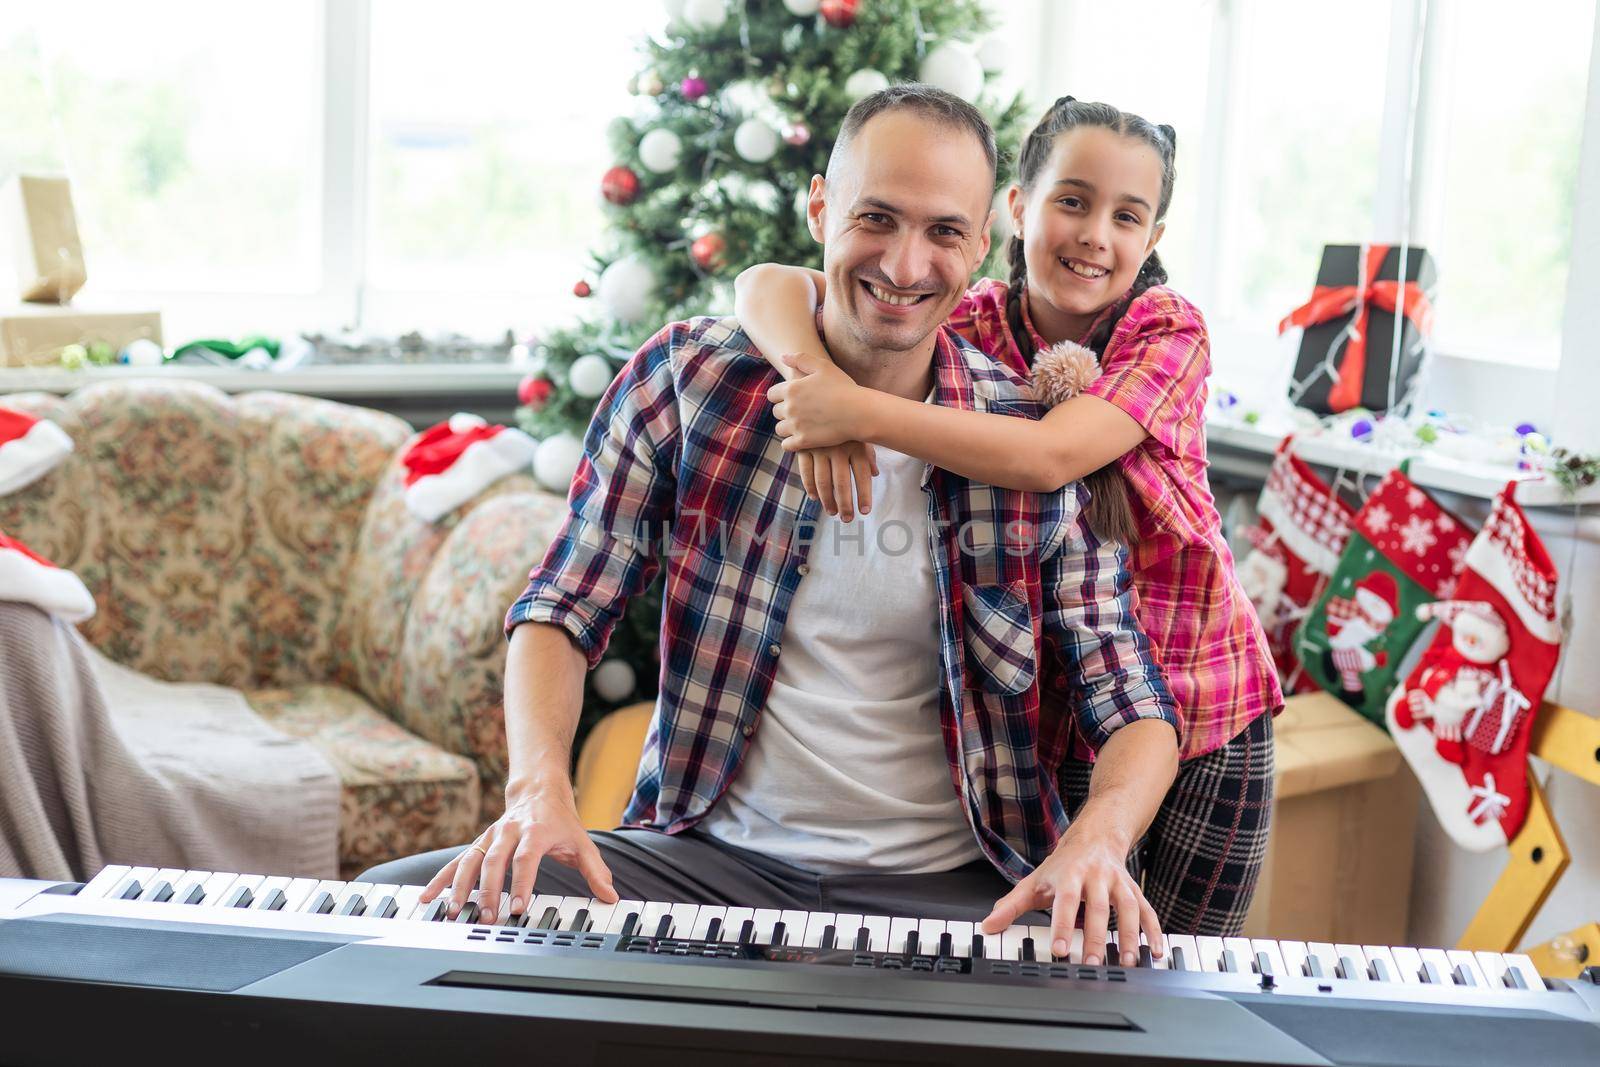 Smiling family on Christmas morning play music on piano